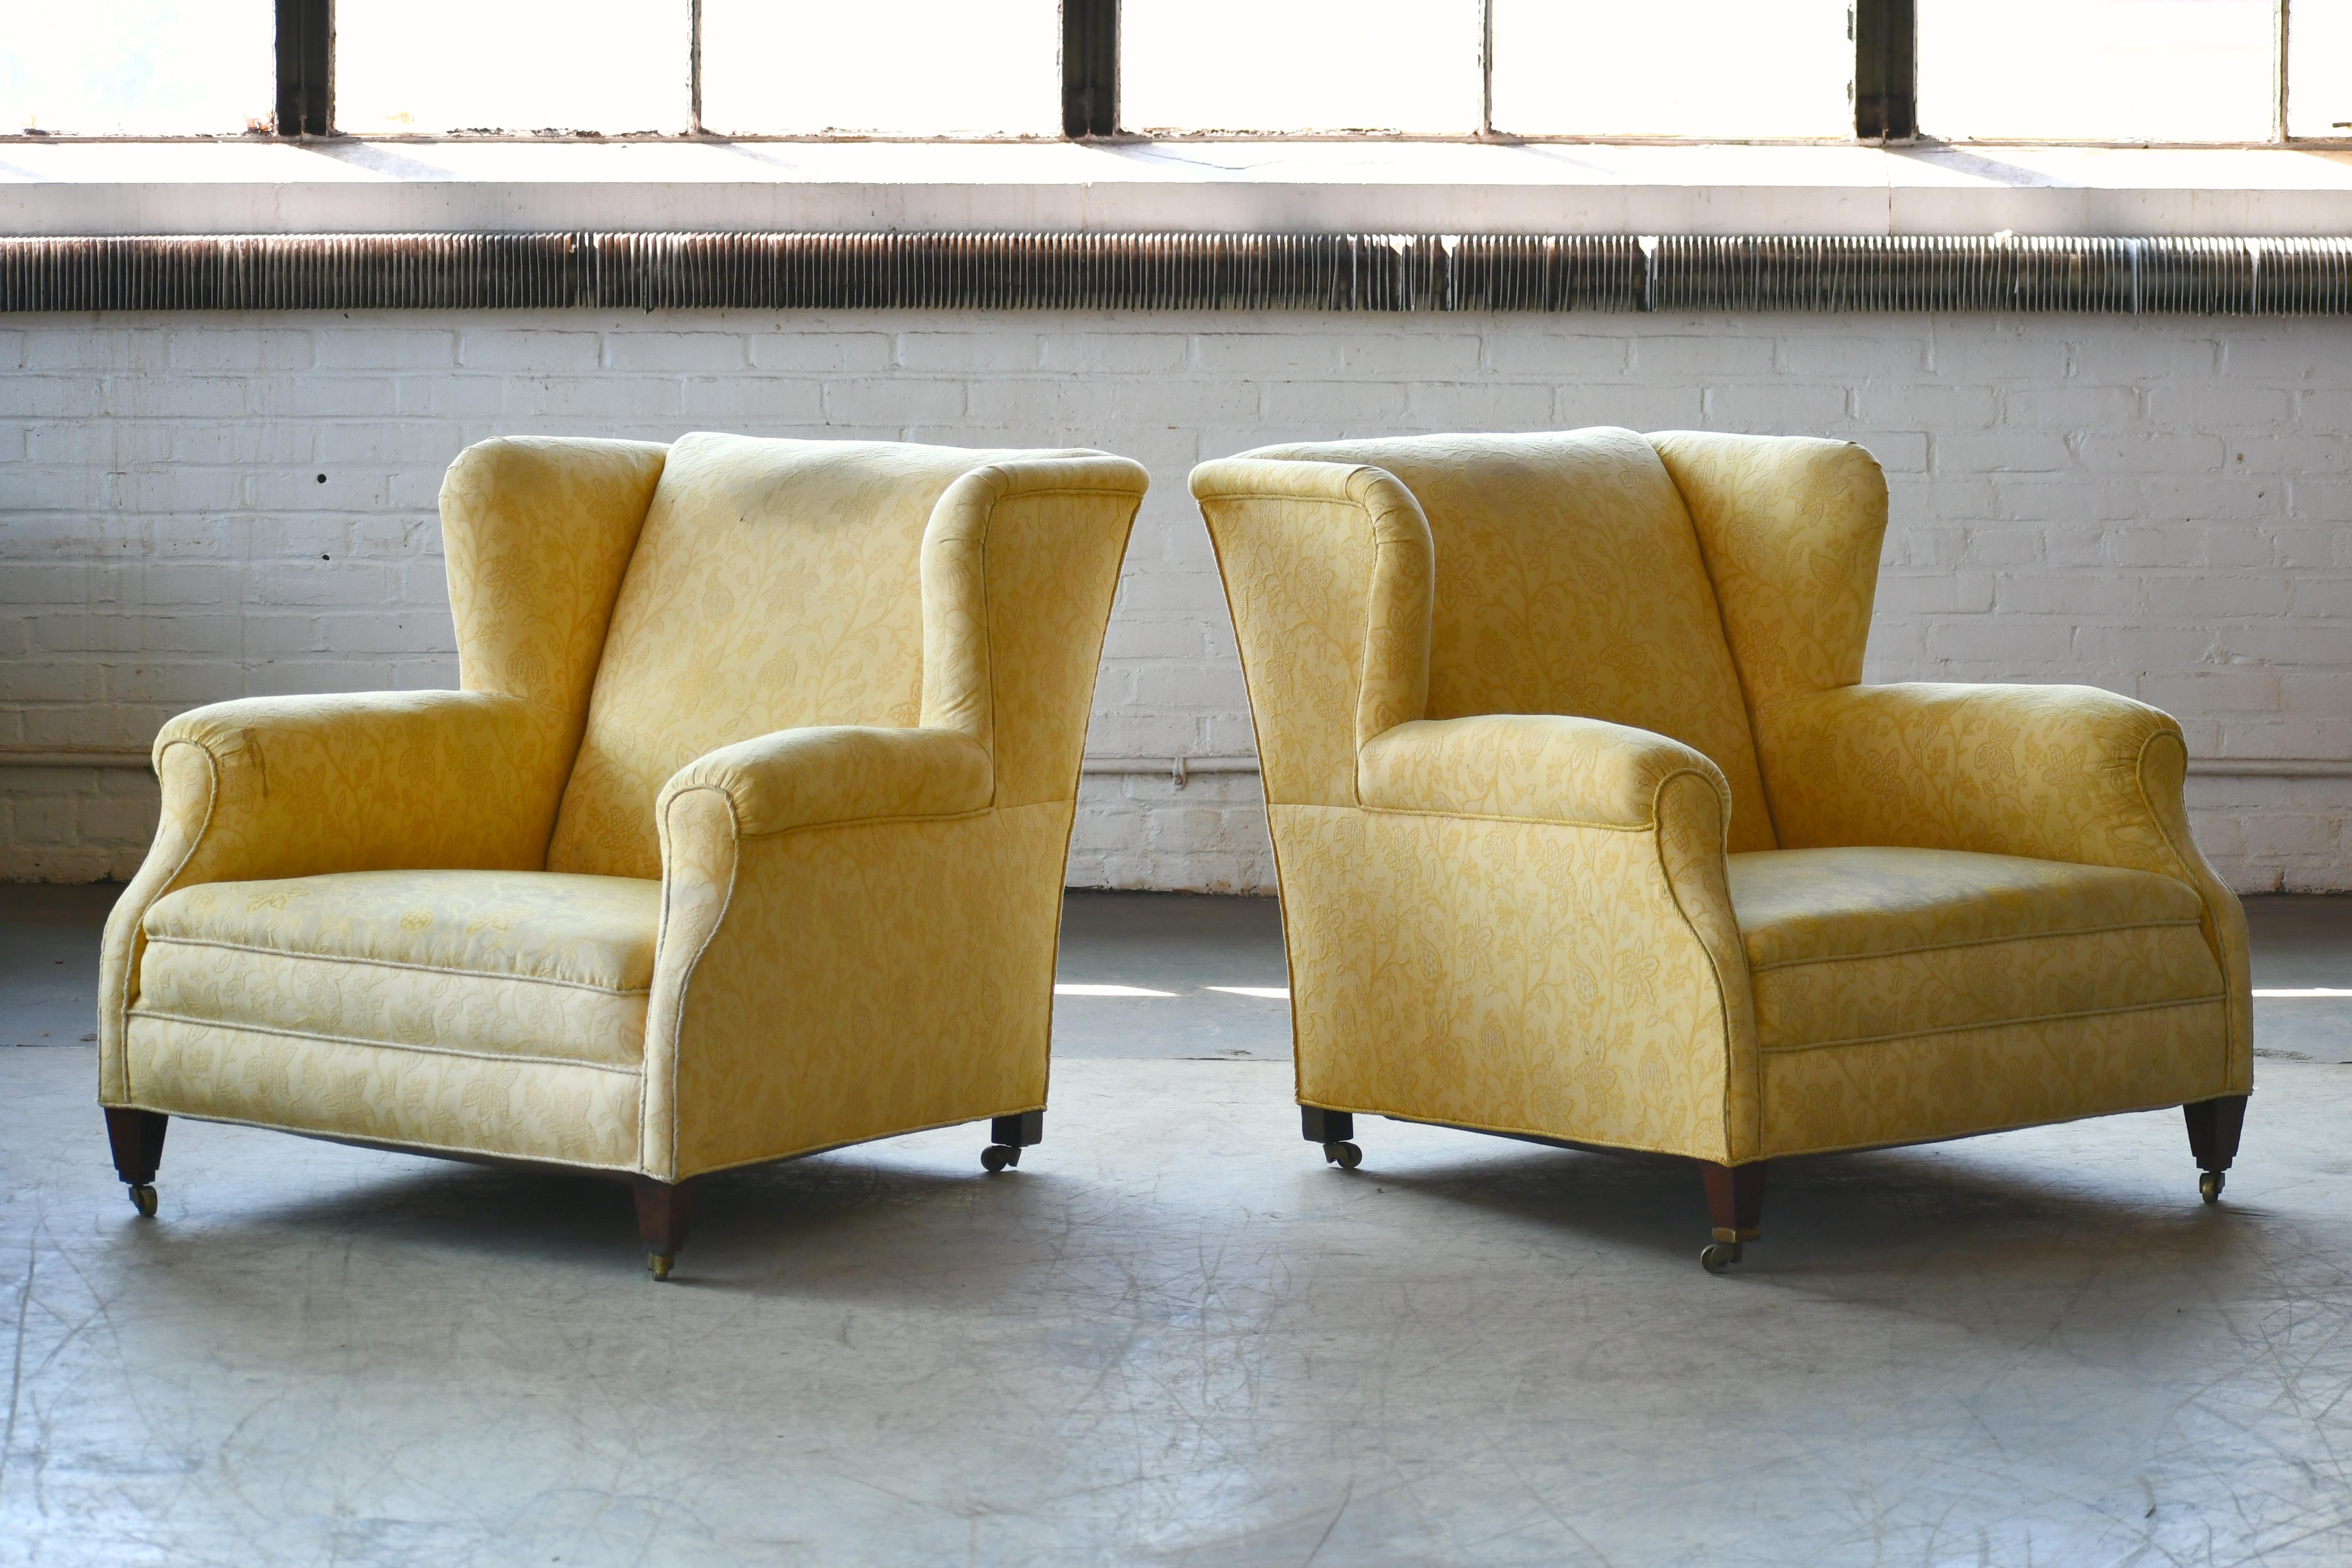 Superbly stylish pair of oversized club chairs and based on style, construction and condition probably made around 1950. The style is very English but we found them in Denmark and they are most likely Danish. The Silhouette is a little bit Fritz